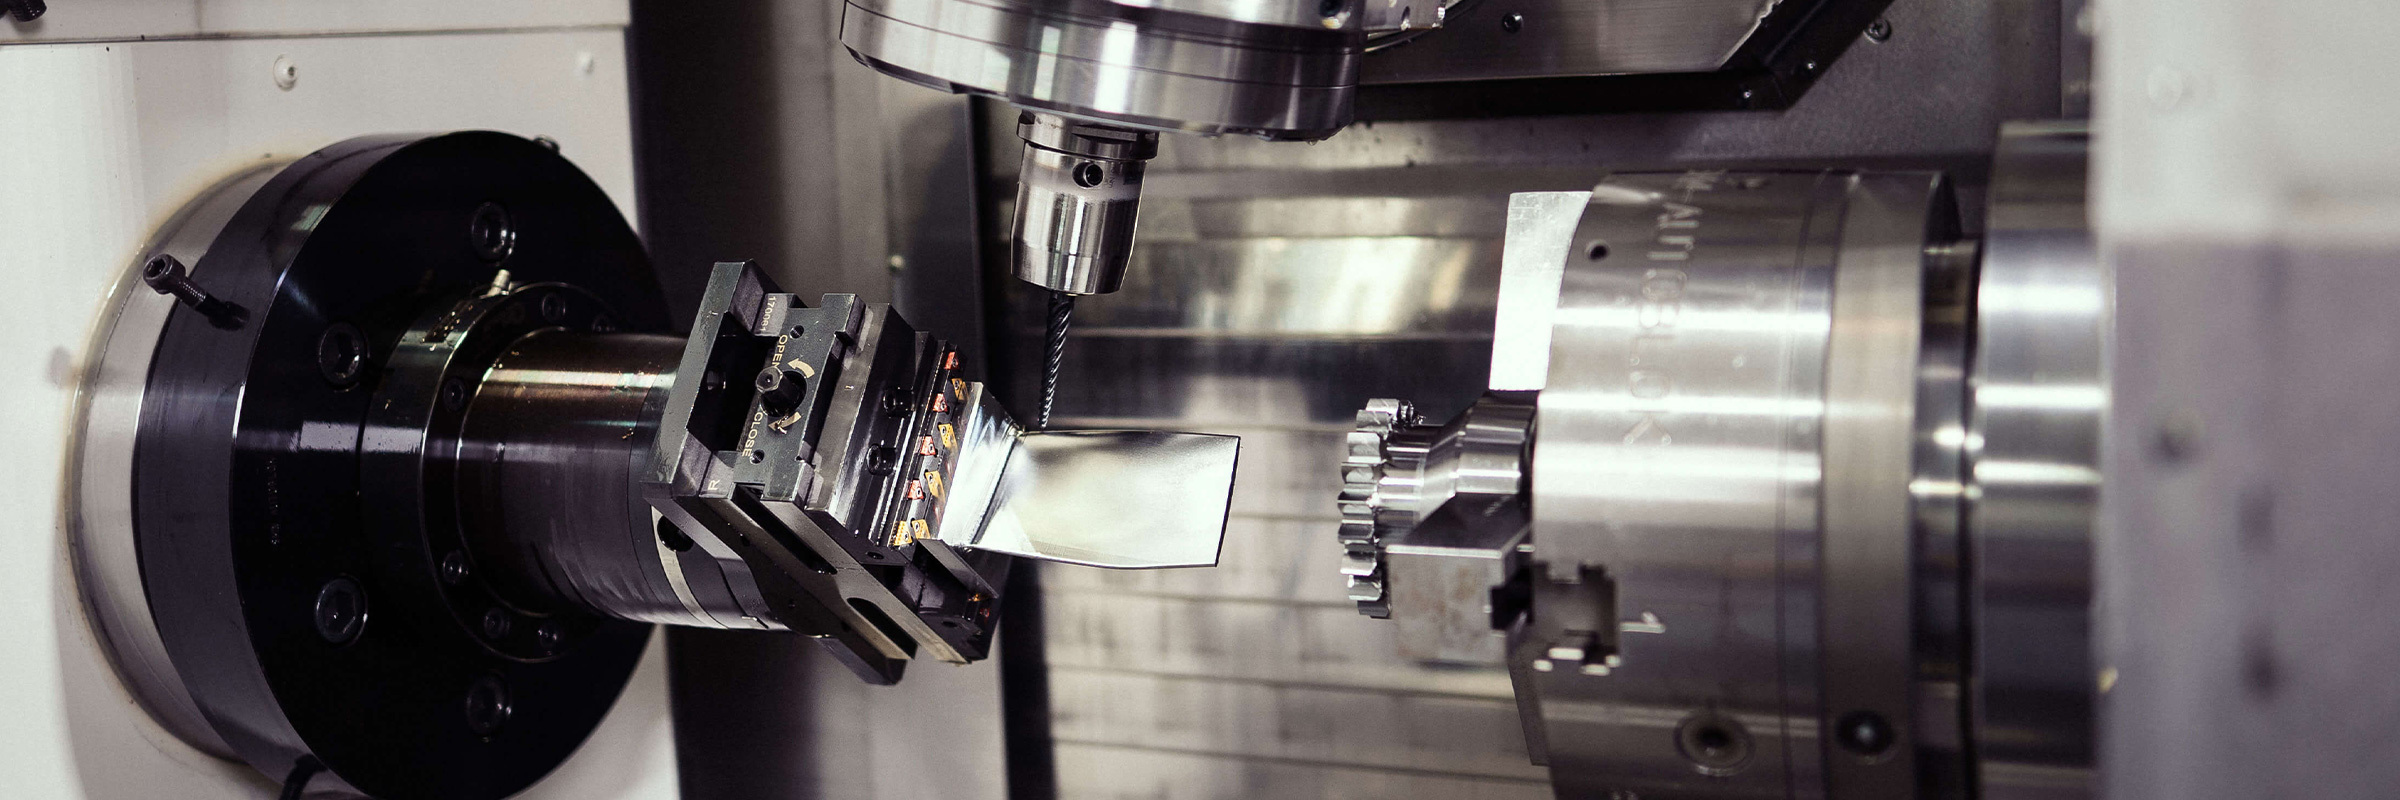 Two Ways Your Quality Machine Tool Will Pay for Itself | Okuma